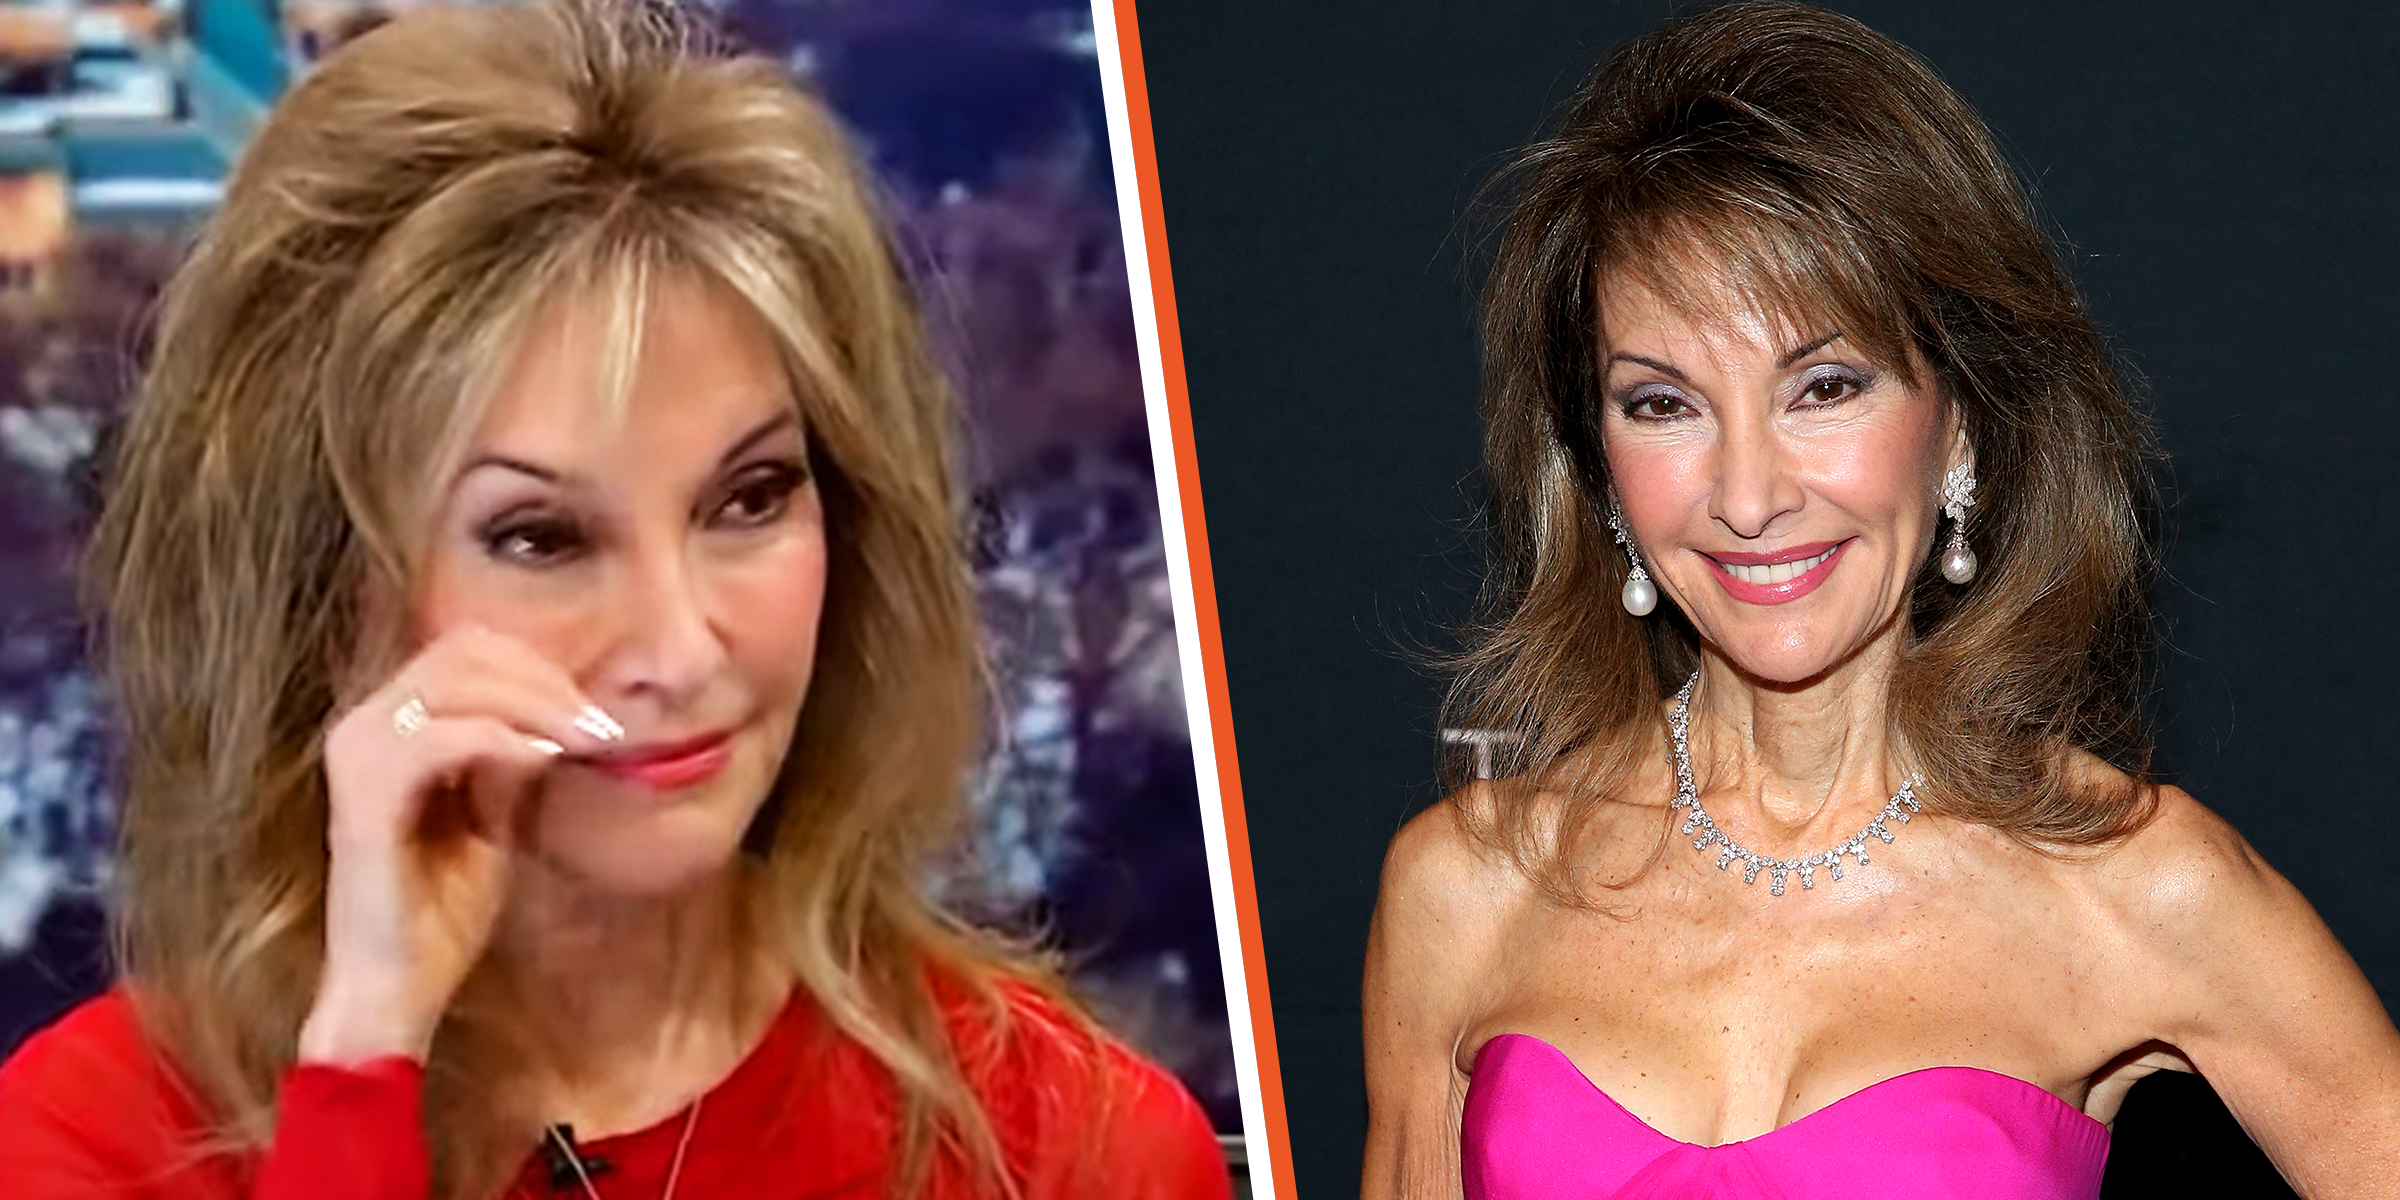 Susan Lucci | Sources: YouTube/Fox 5 New York | Getty Images